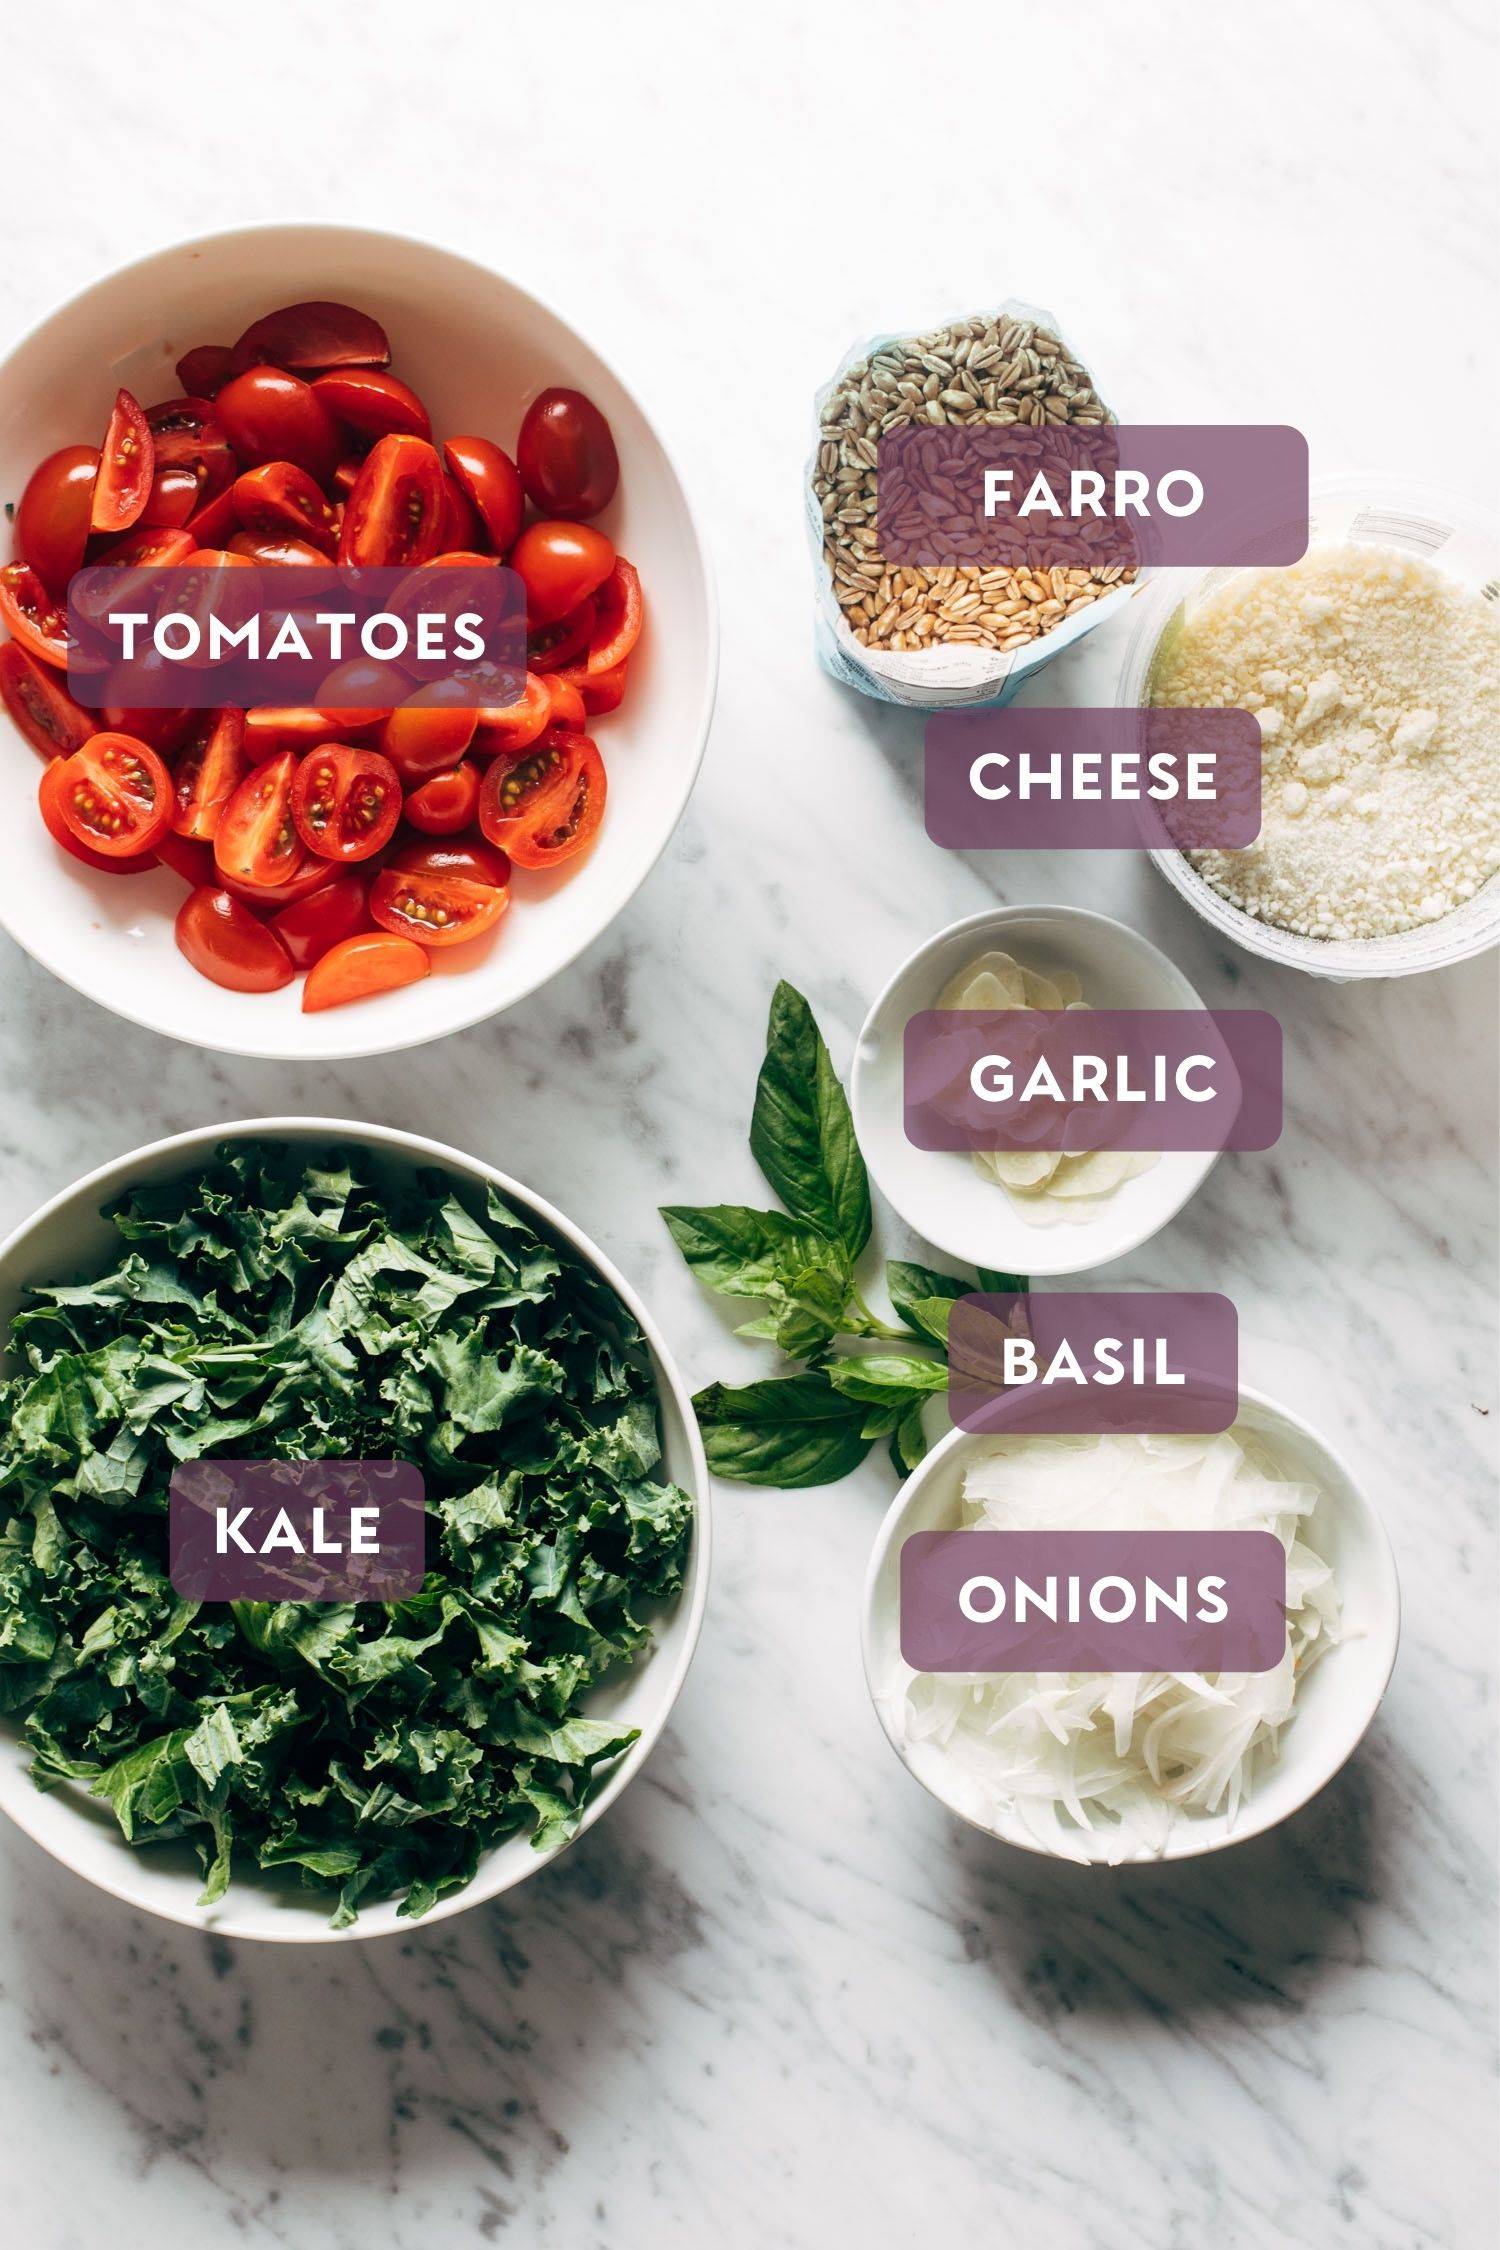 Ingredients for one-pan farro with tomatoes and kale. Ingredients have text over them in purple bubbles. 